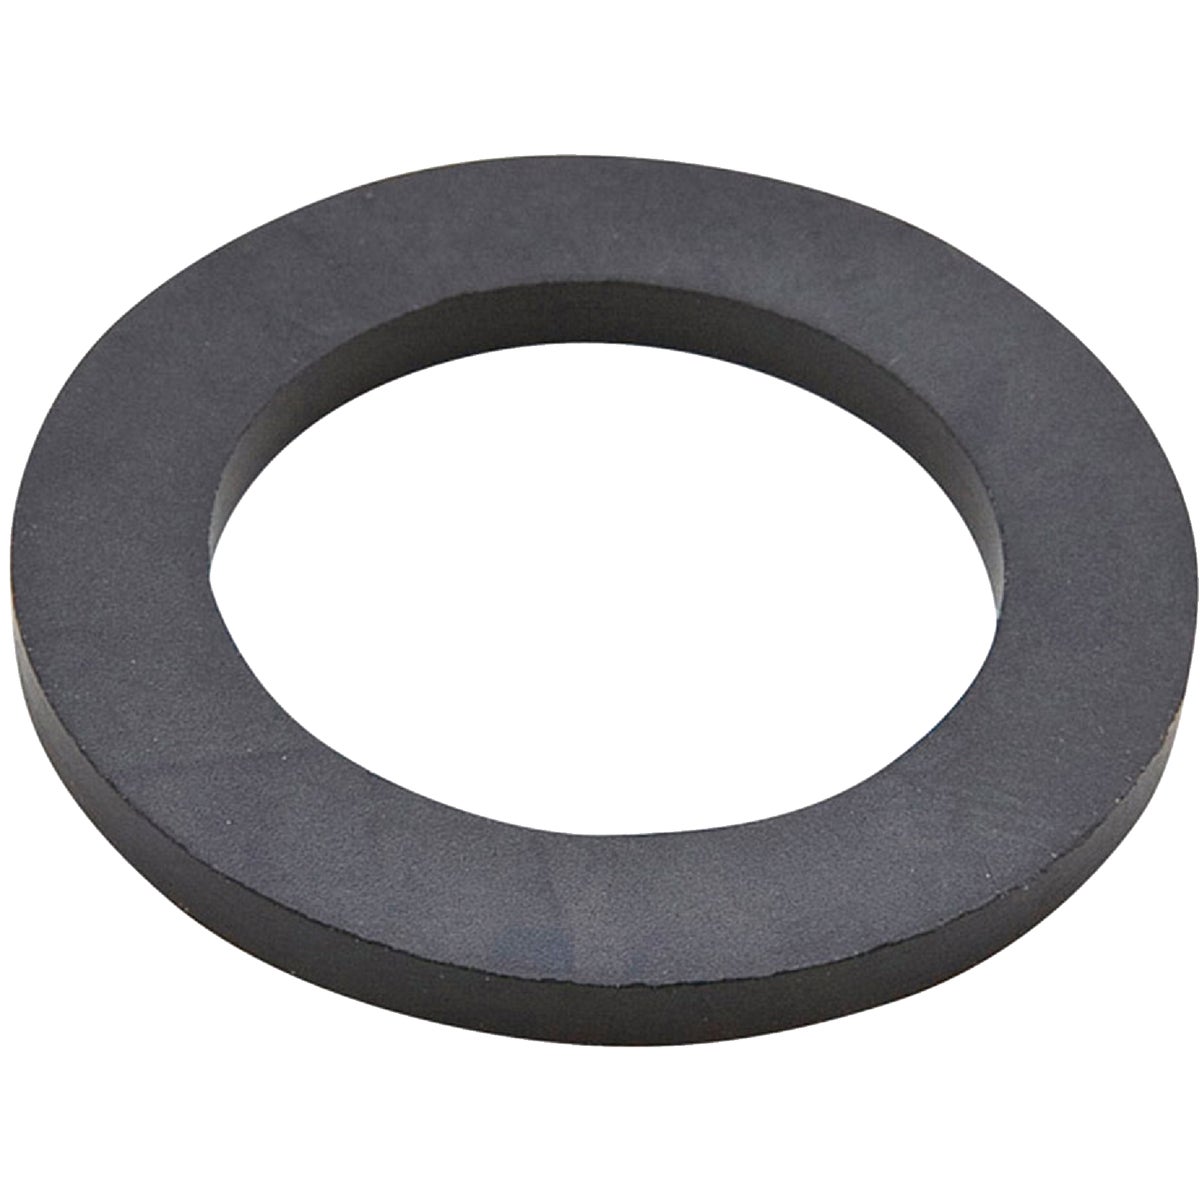 B&K 1 In. Rubber Washer for Galvanized Dielectric Union